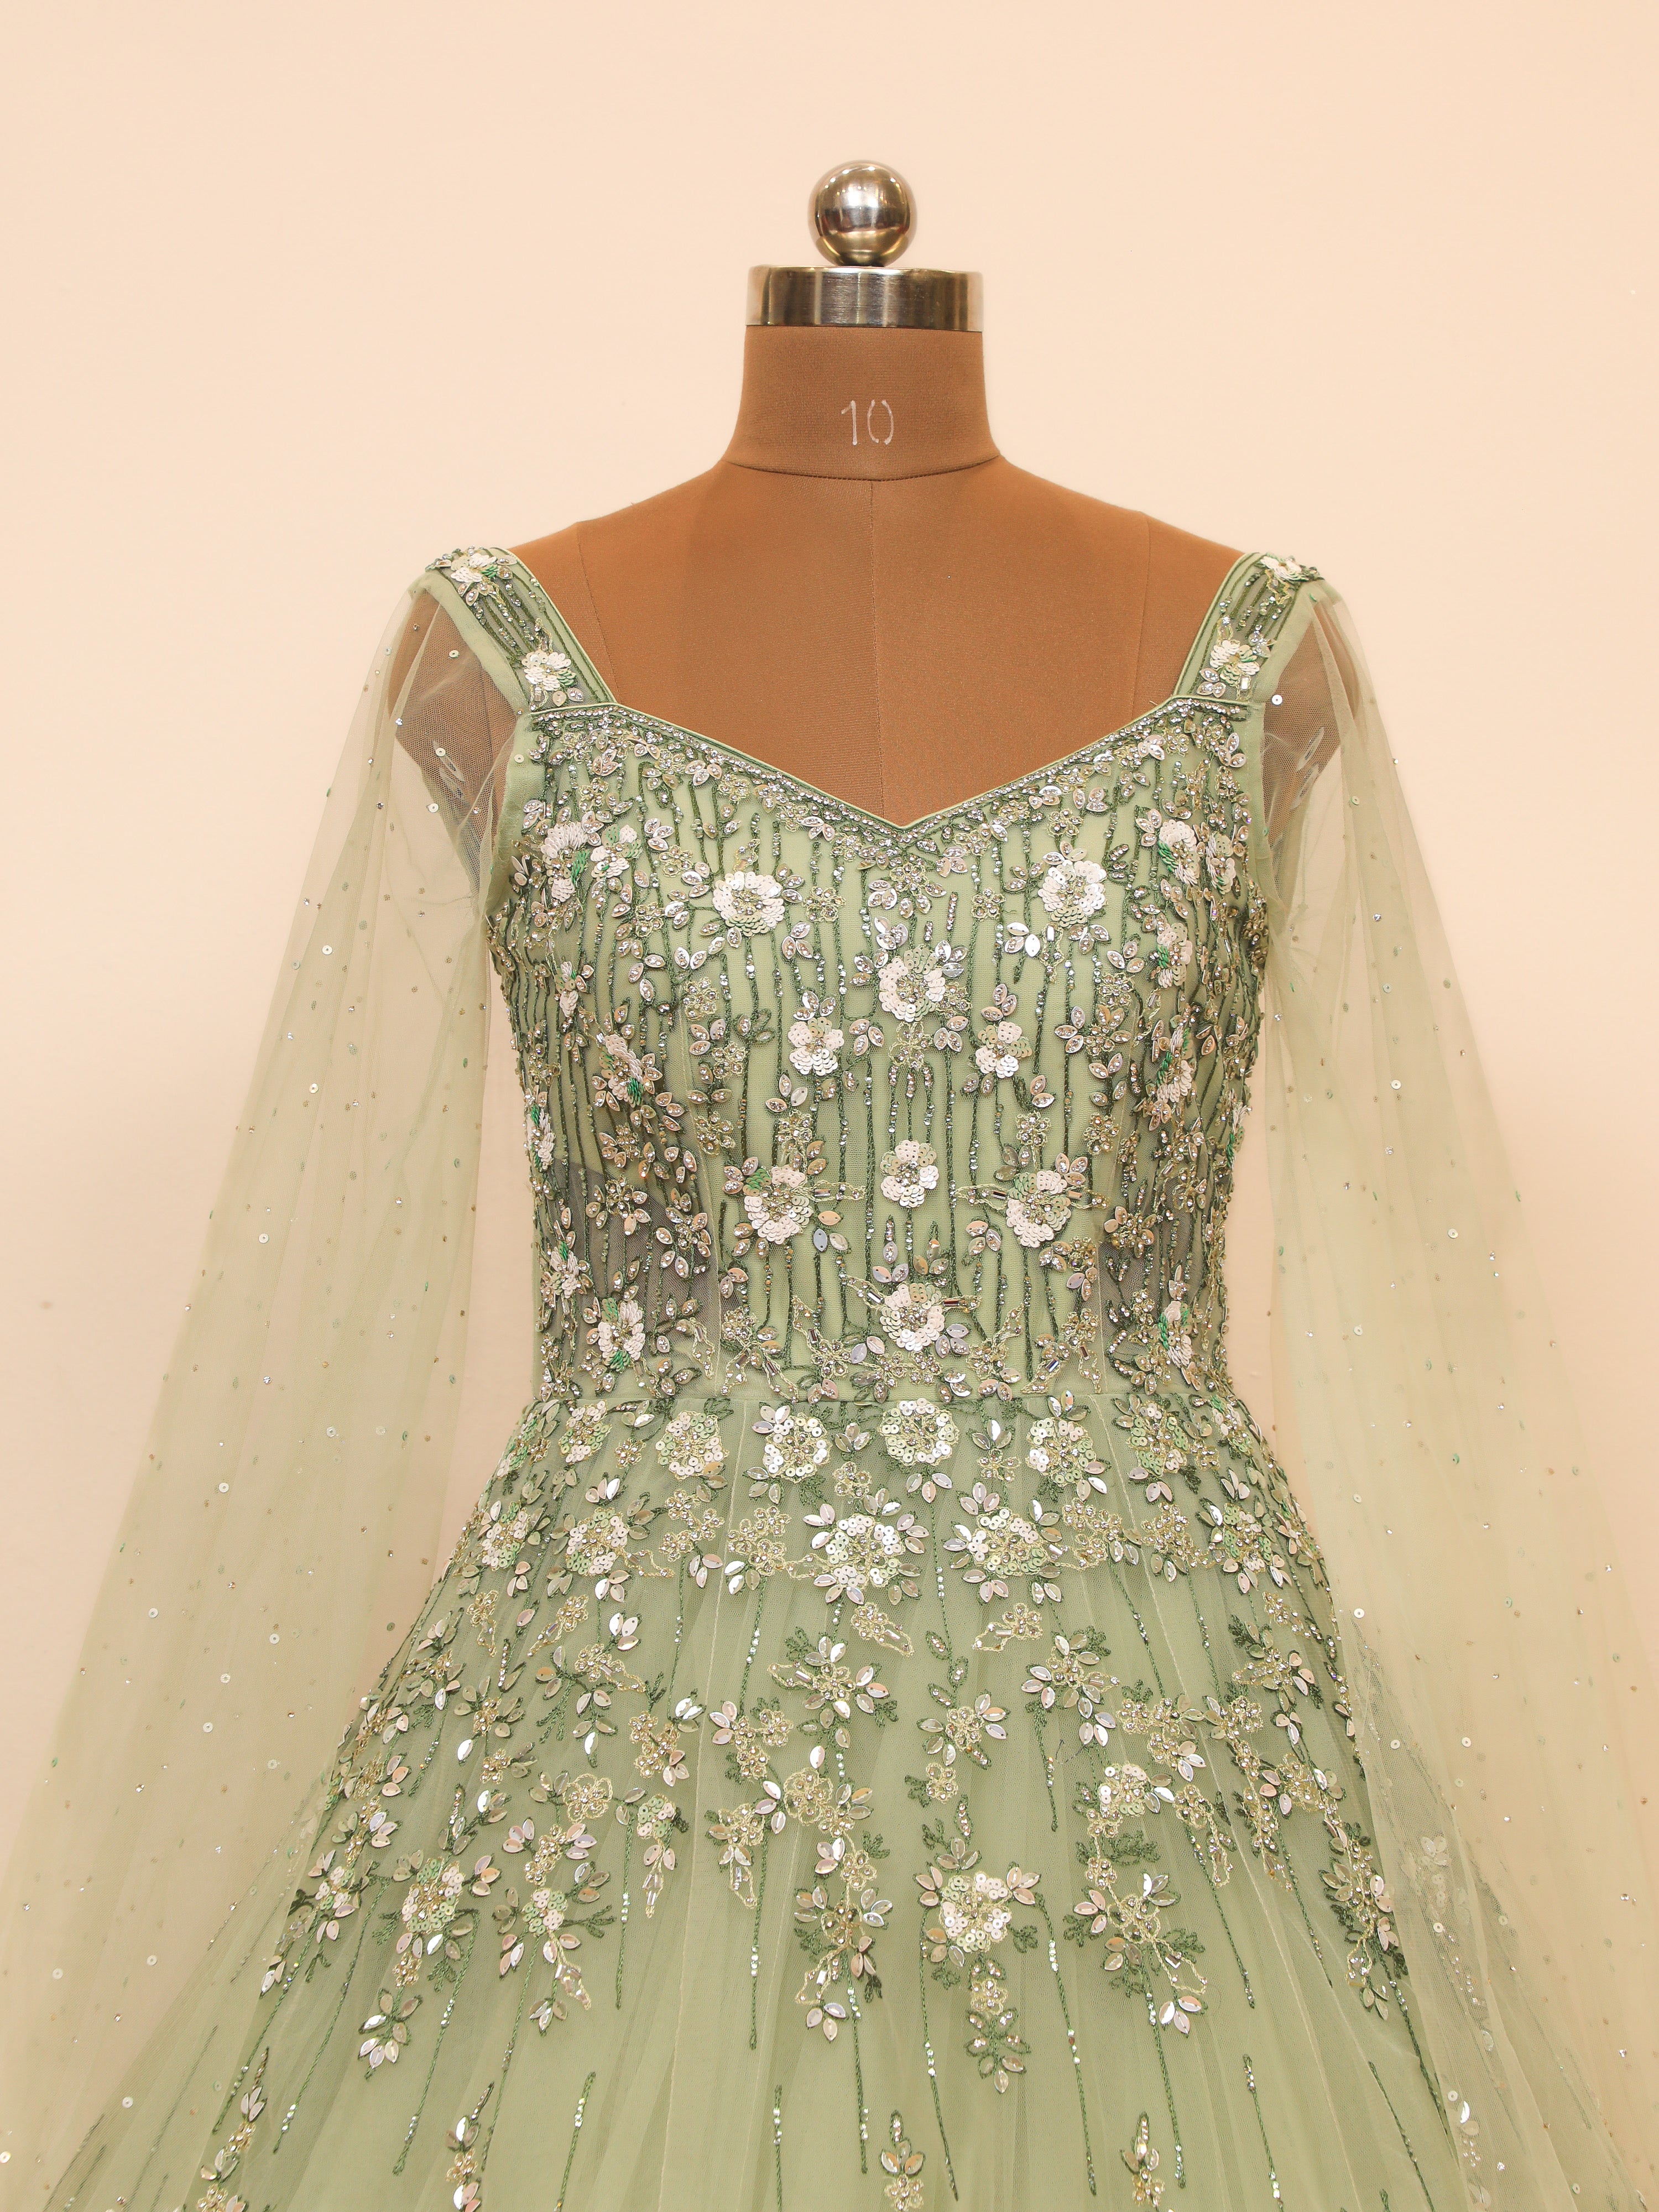 Vintage Embroidery Wedding Dresses Gothic White and Green Strapless Bridal  Gowns | eBay